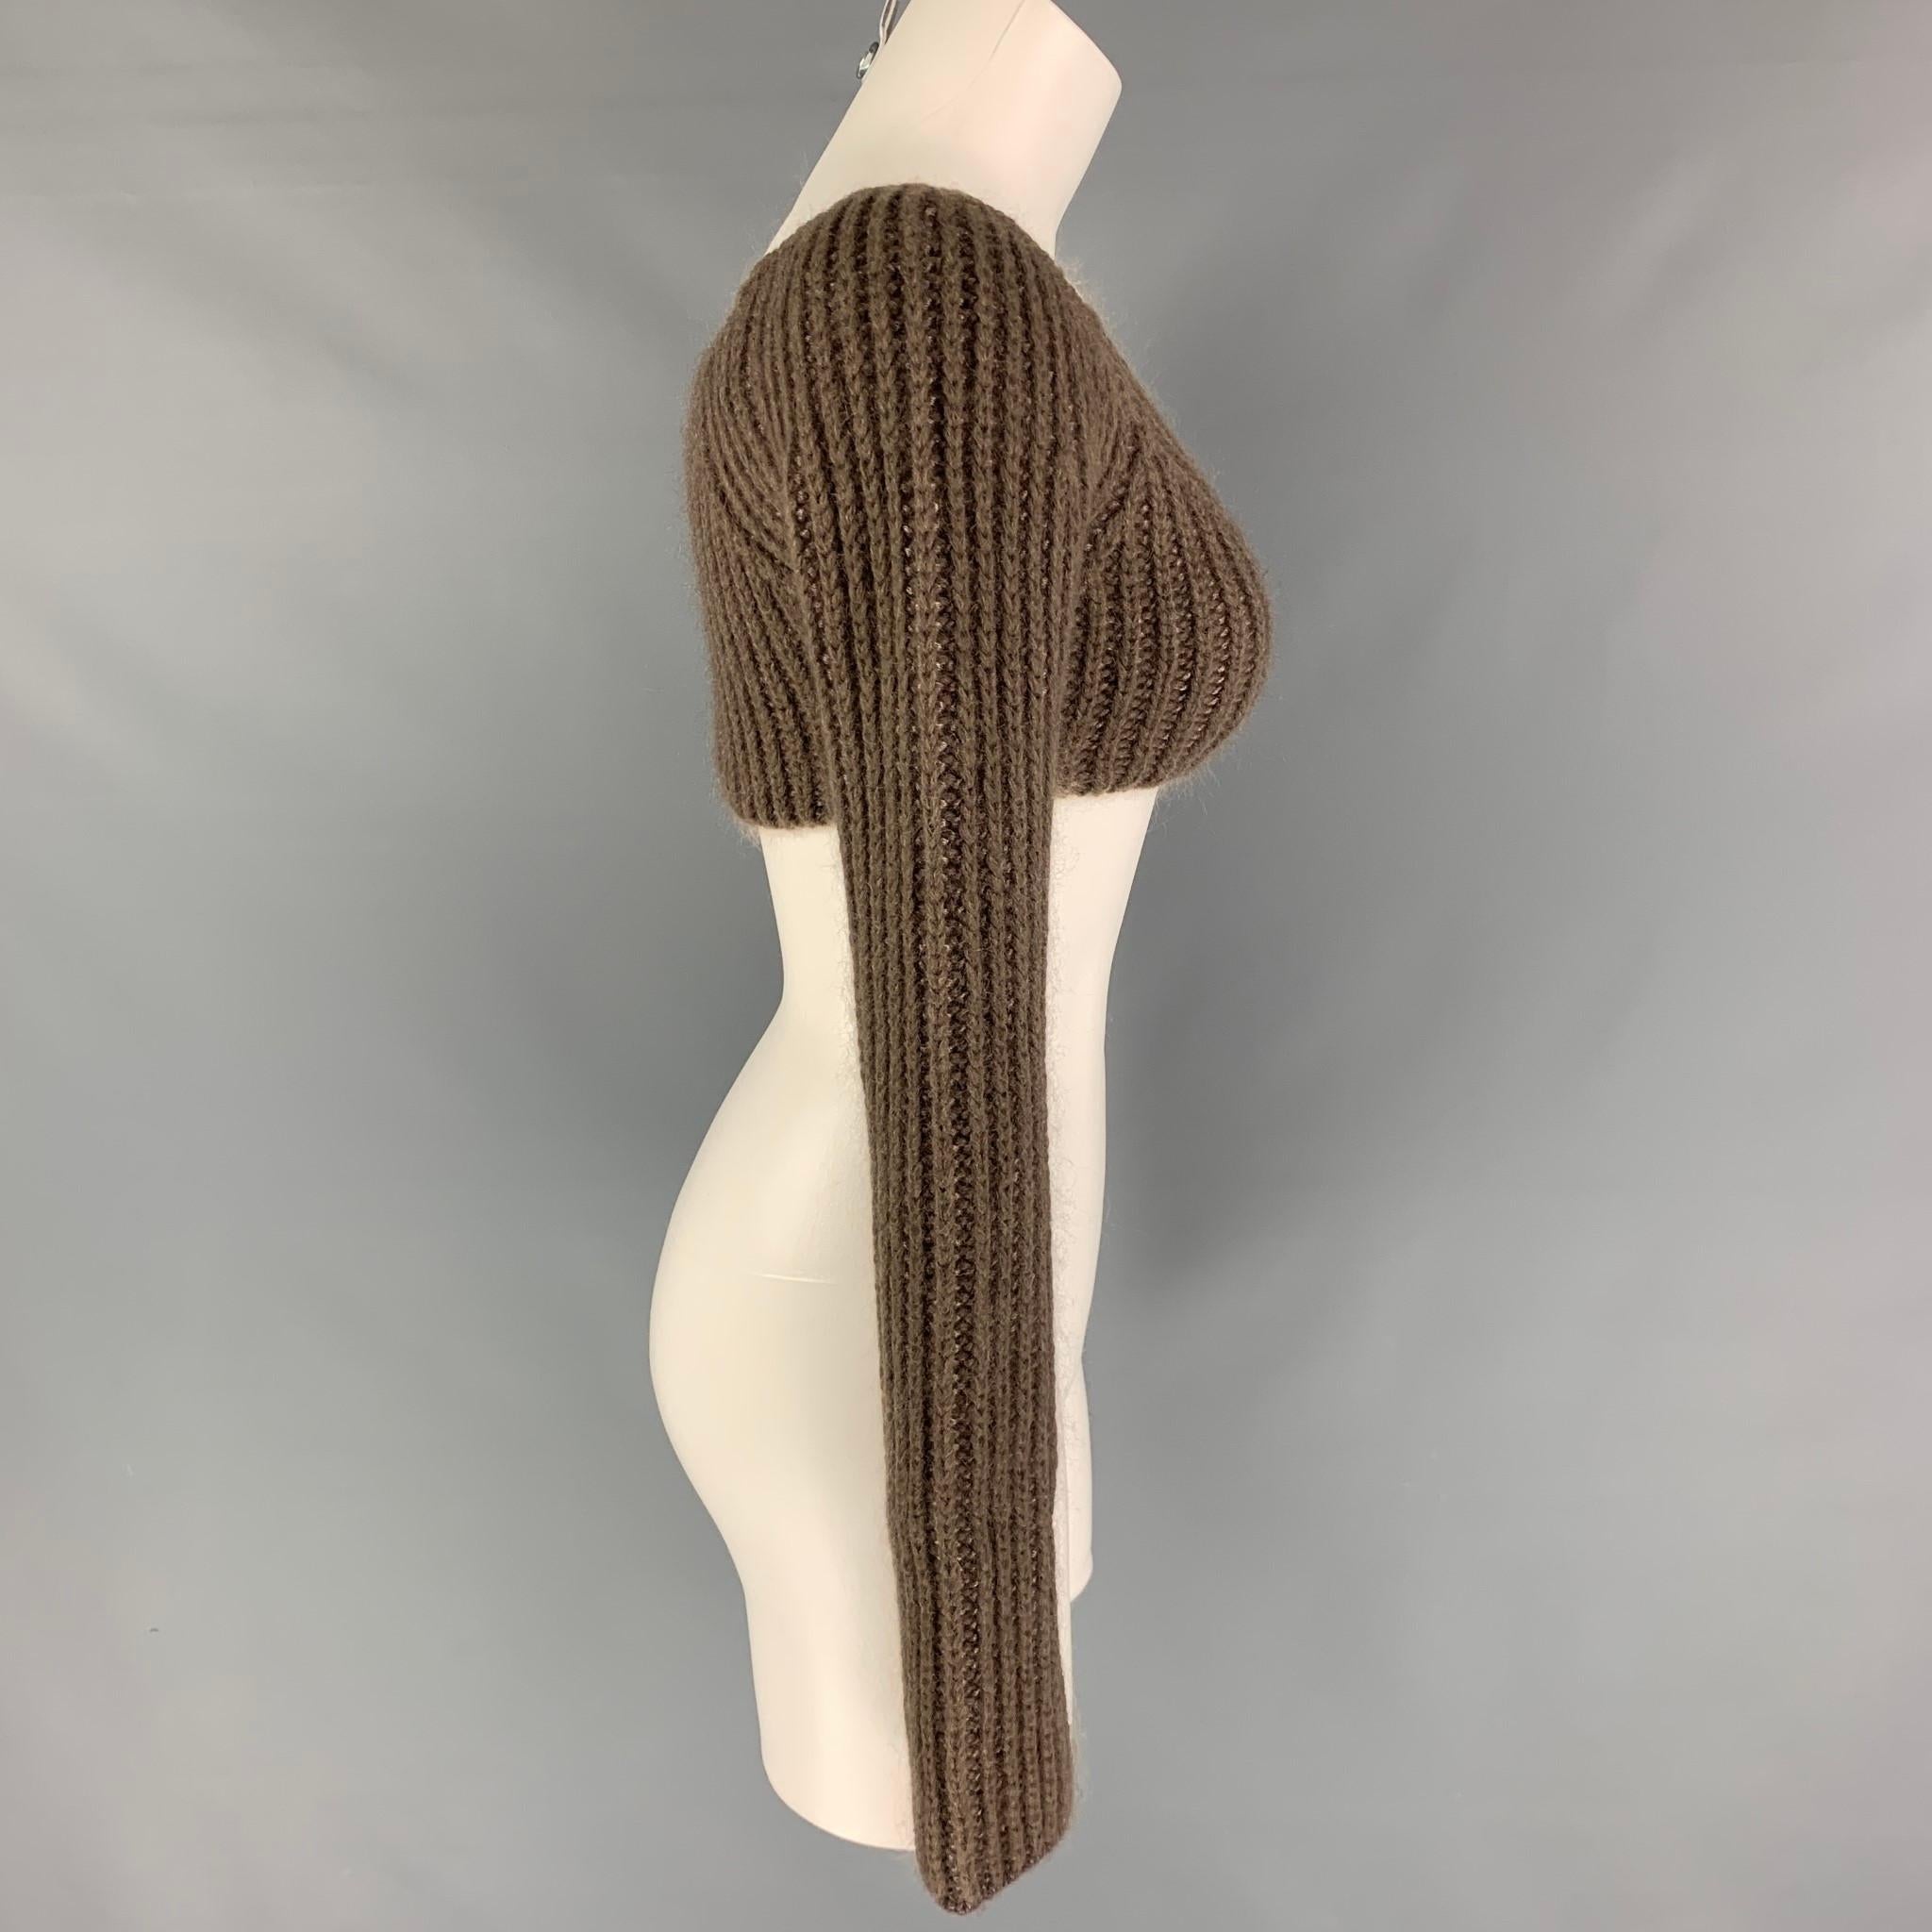 FENDI top comes in a taupe mohair / silk featuring a cropped style, off the shoulder, and long sleeves. Matching skirt sole separately. Made in Italy.

Excellent Pre-Owned Condition.
Marked: 38
Original Retail Price: